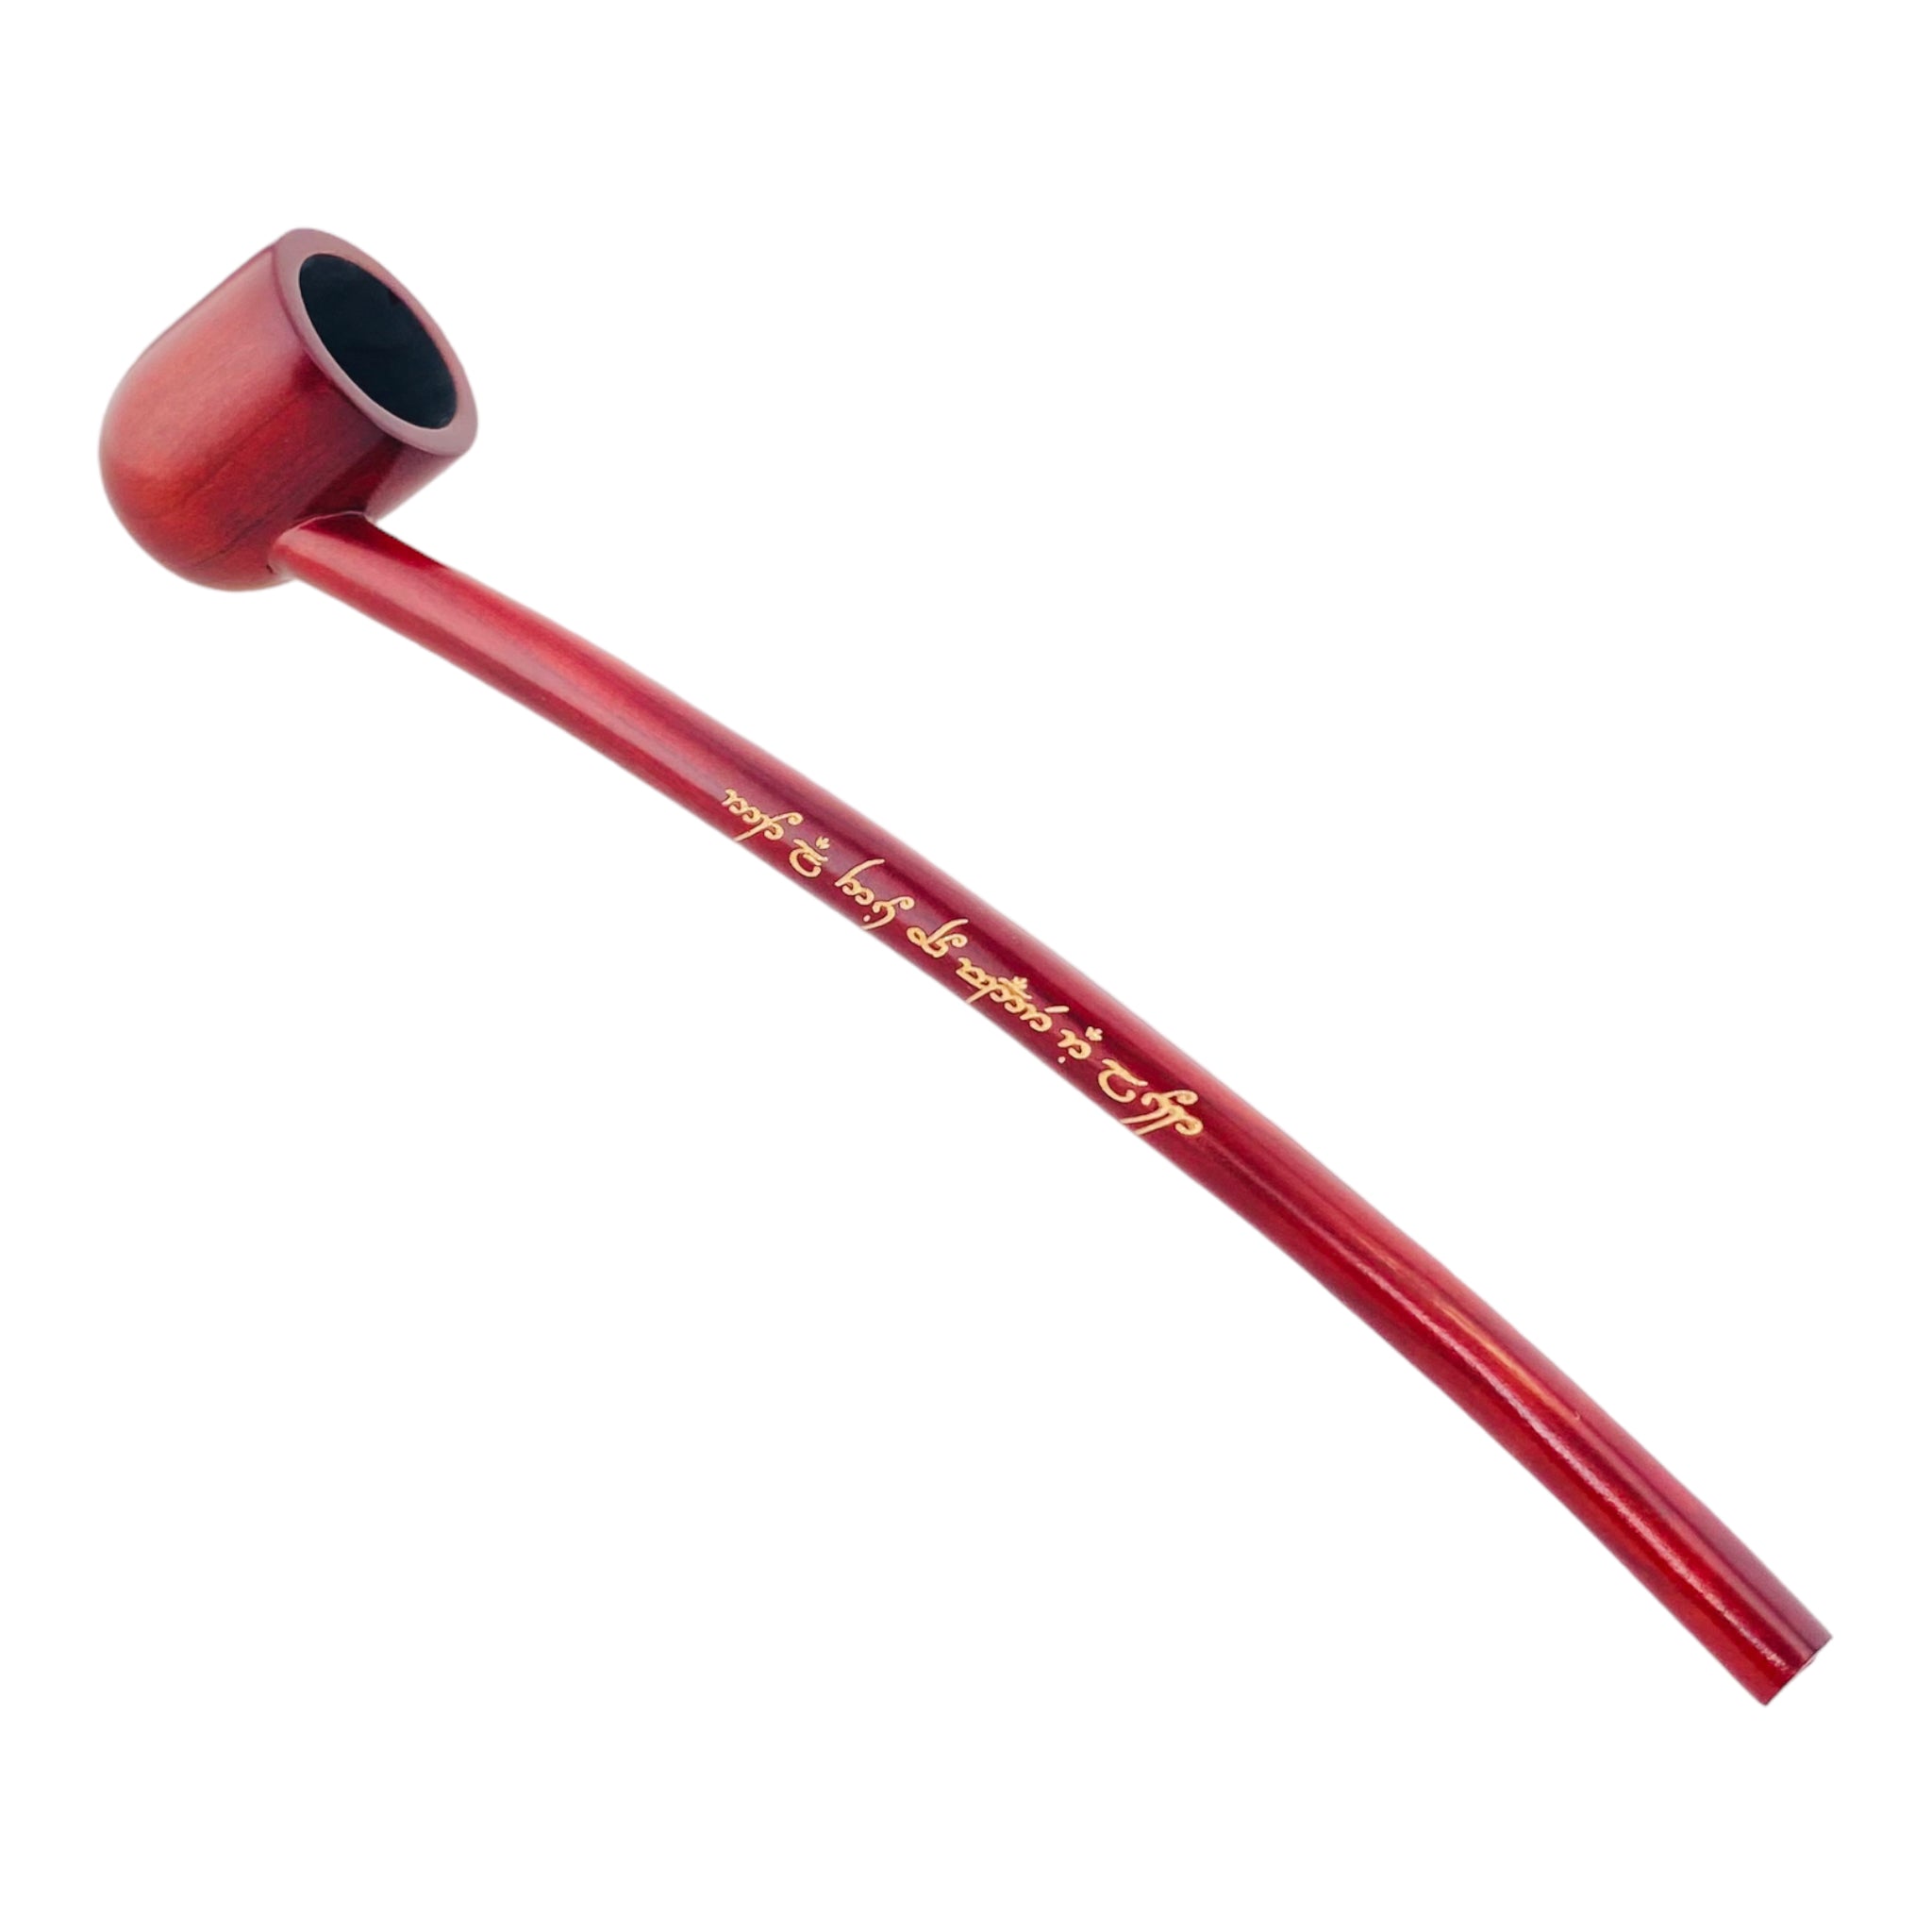 Shire Pipes - The Lord Of The Rings - Aragorn Smoking Pipe